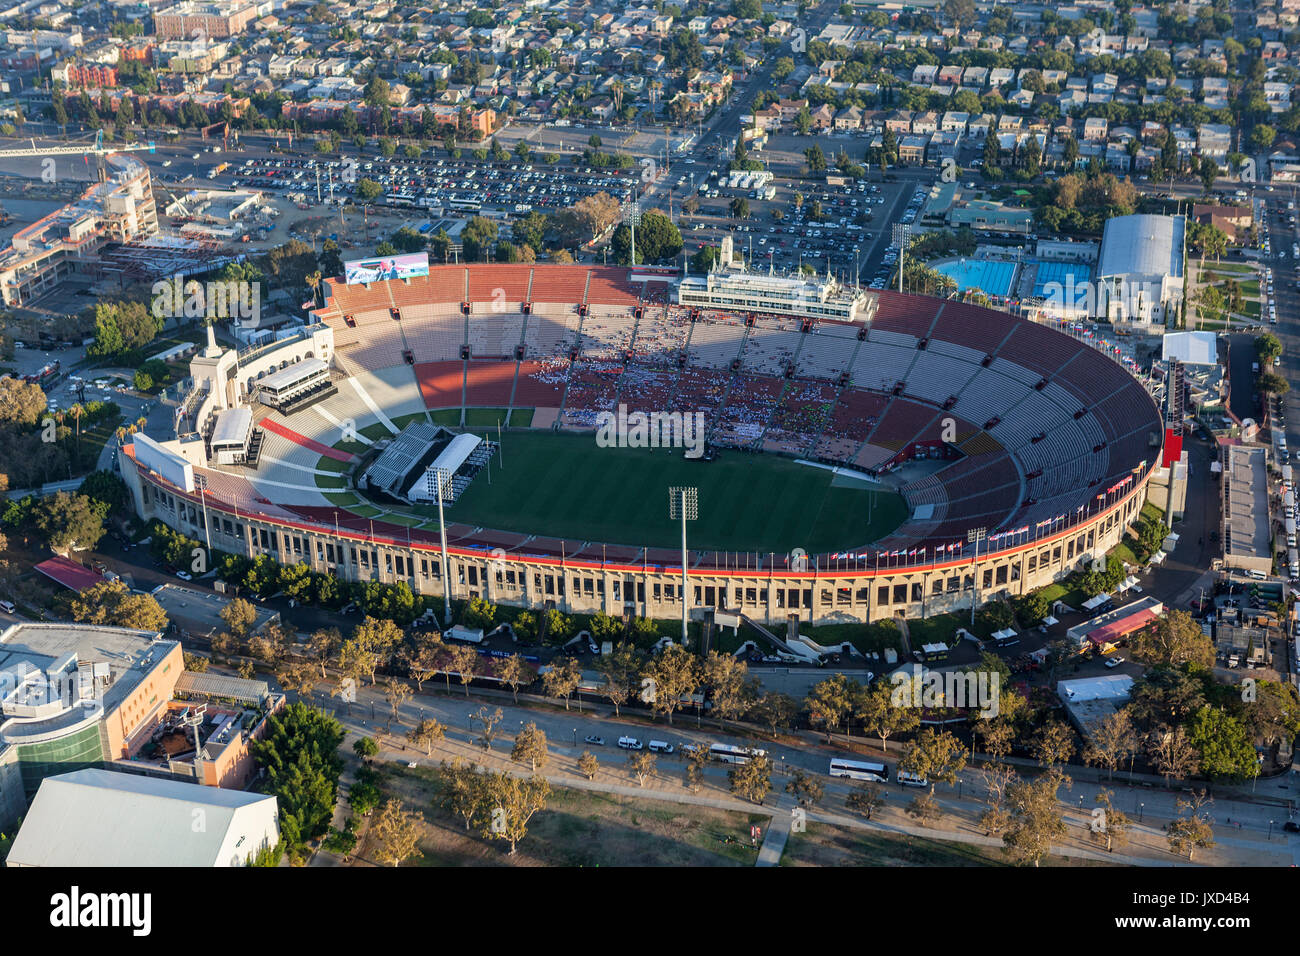 Los Angeles, California, USA - August 7, 2017:  Aerial view of the historic LA Coliseum stadium near downtown and USC. Stock Photo